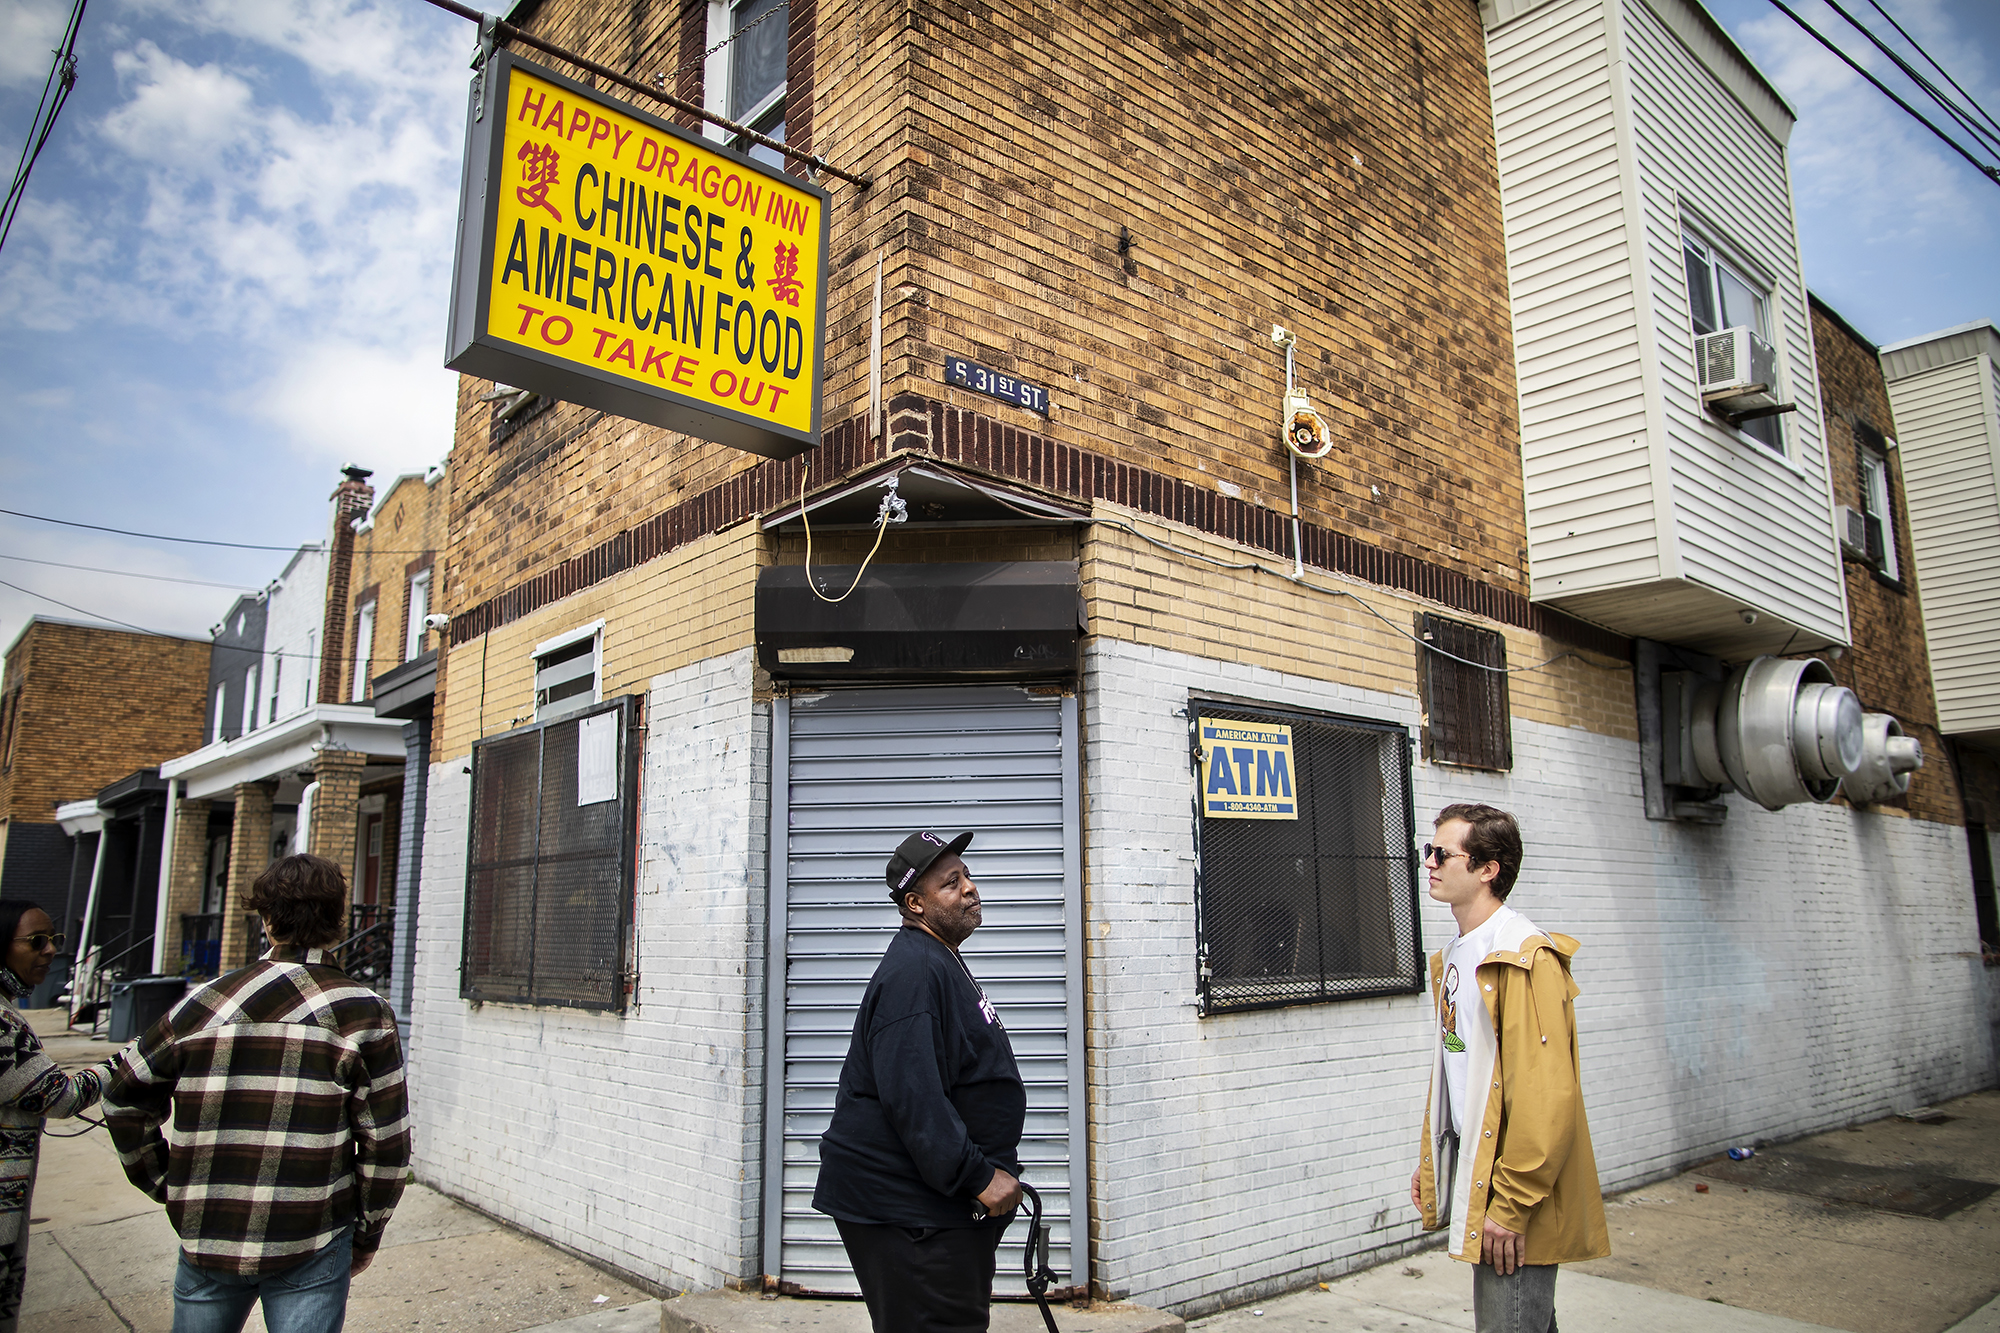 Tammy Reeves, Eli Moraru, Charles Reeves, and Alexandre Imbot stand at the corner of a brick building. A yellow sign reads: Happy Dragon Inn Chinese & American food to take out.